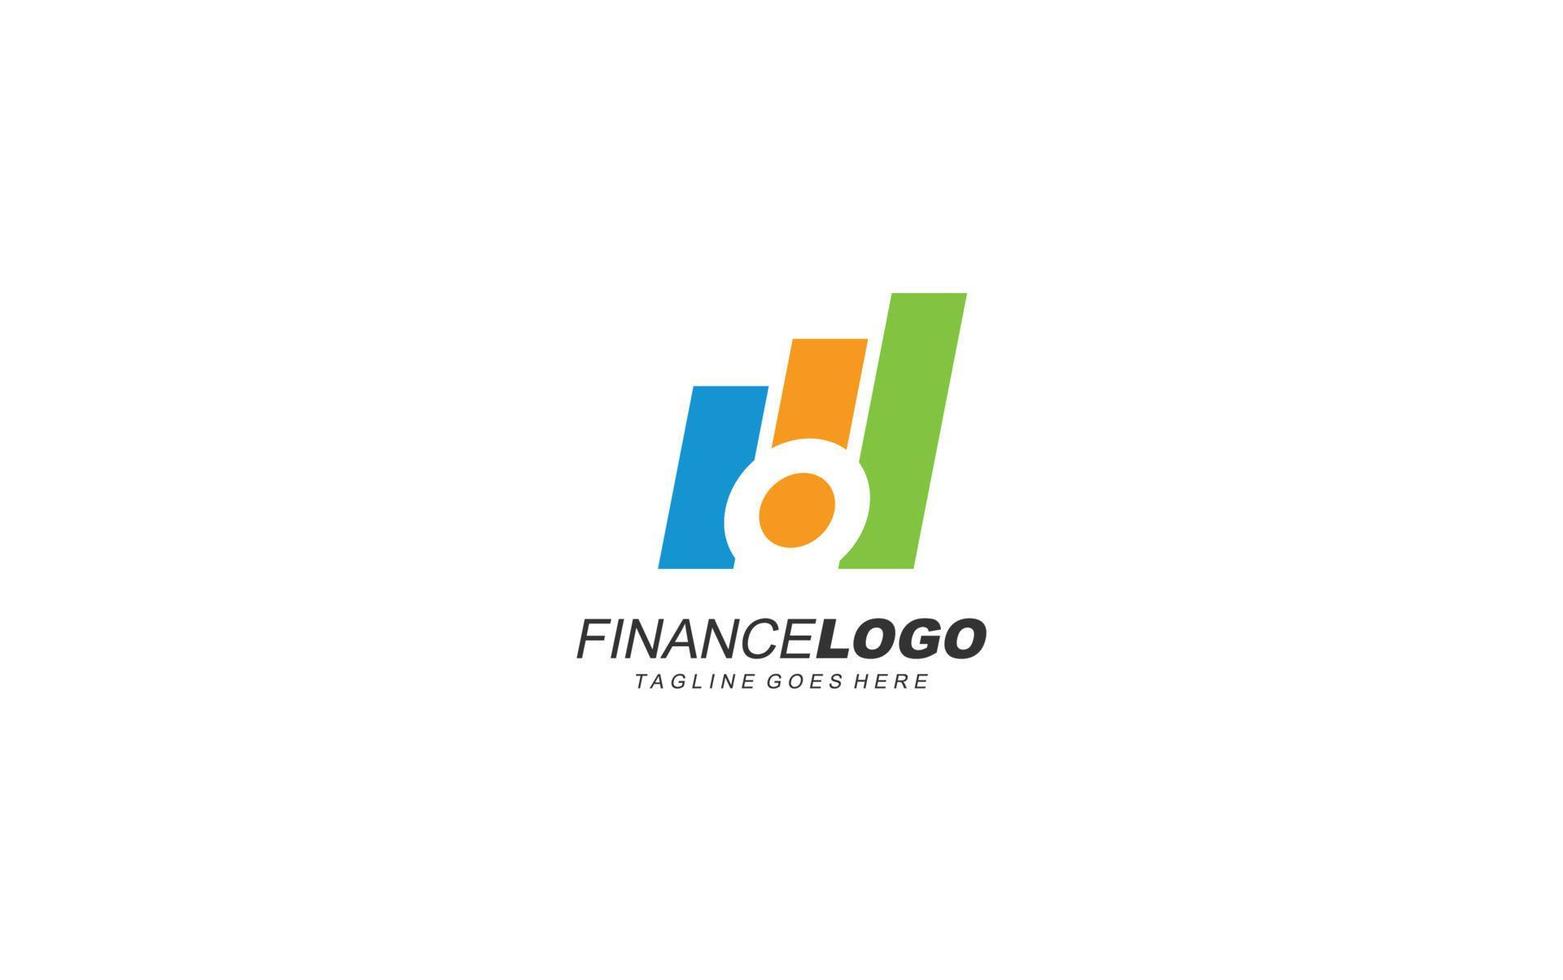 O logo management for company. letter template vector illustration for your brand.